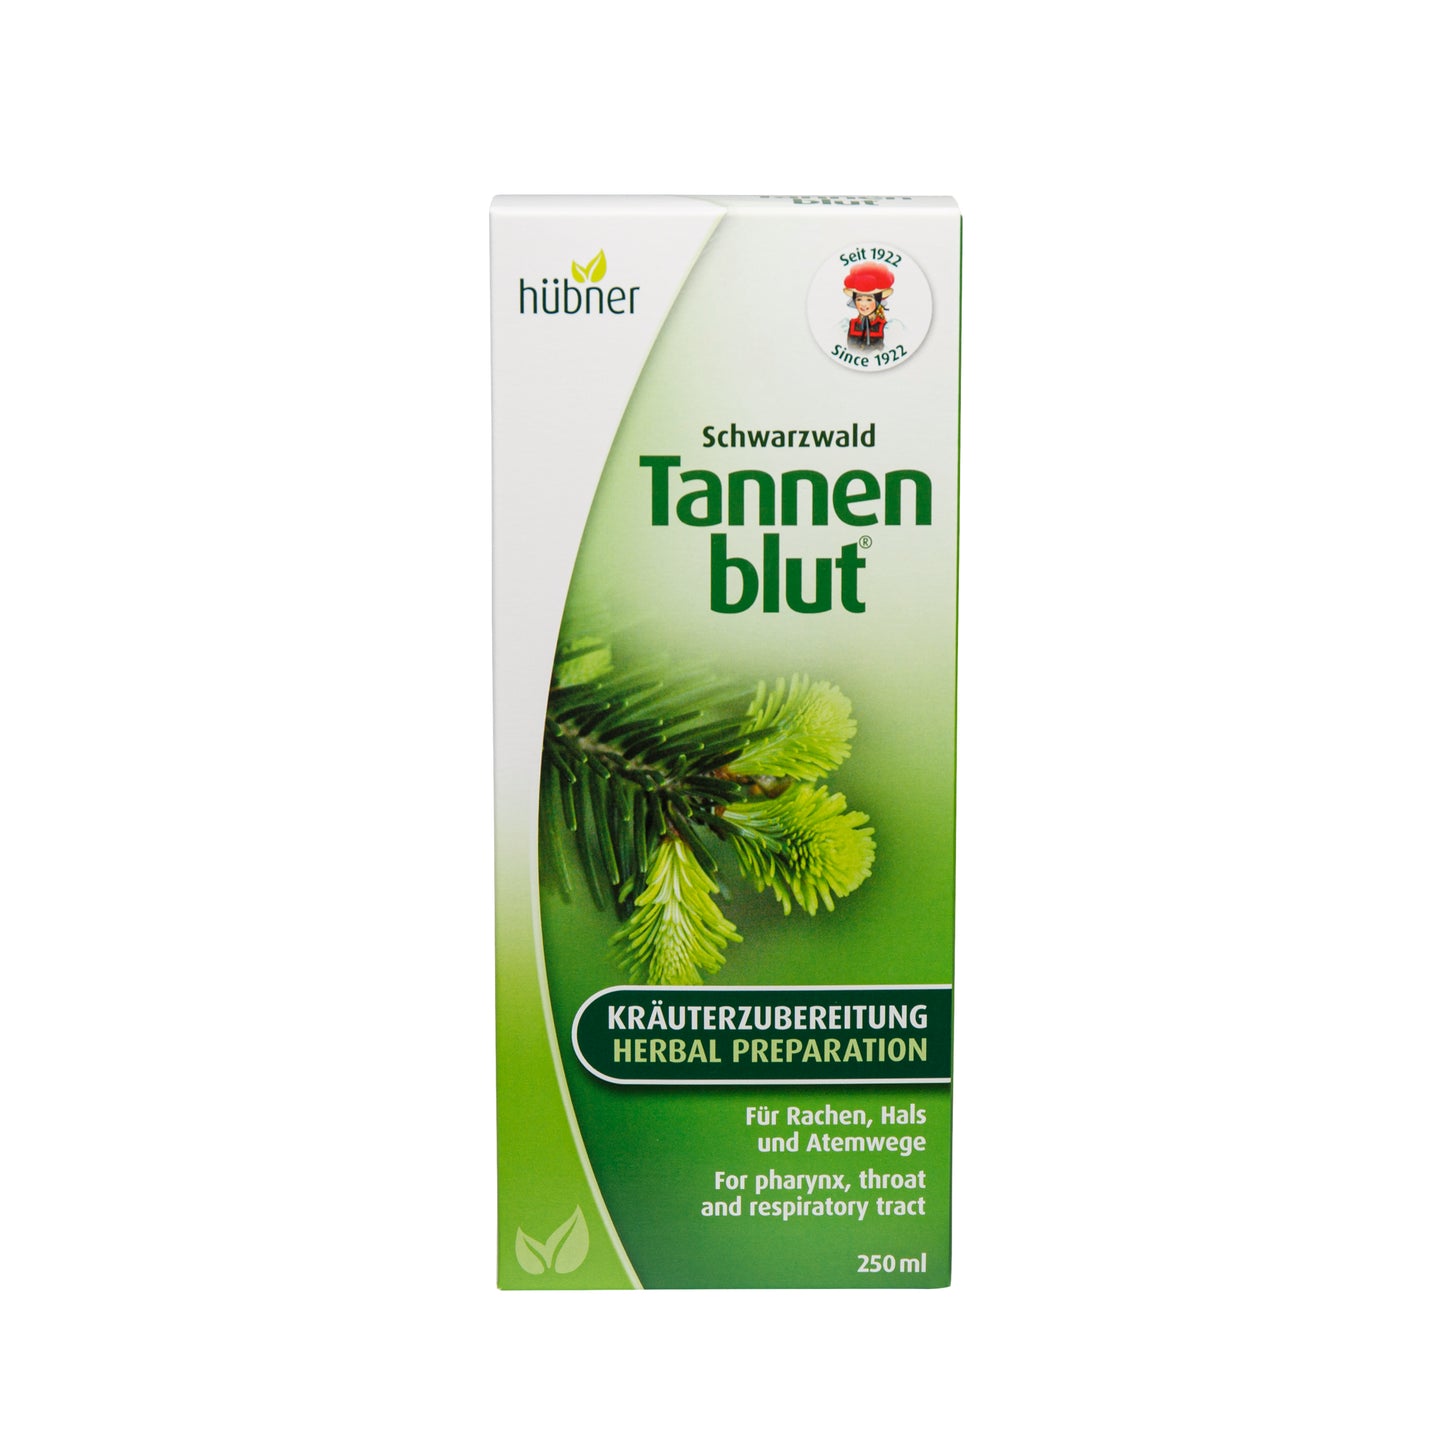 Primary Image of Tannenblut Cough Syrup